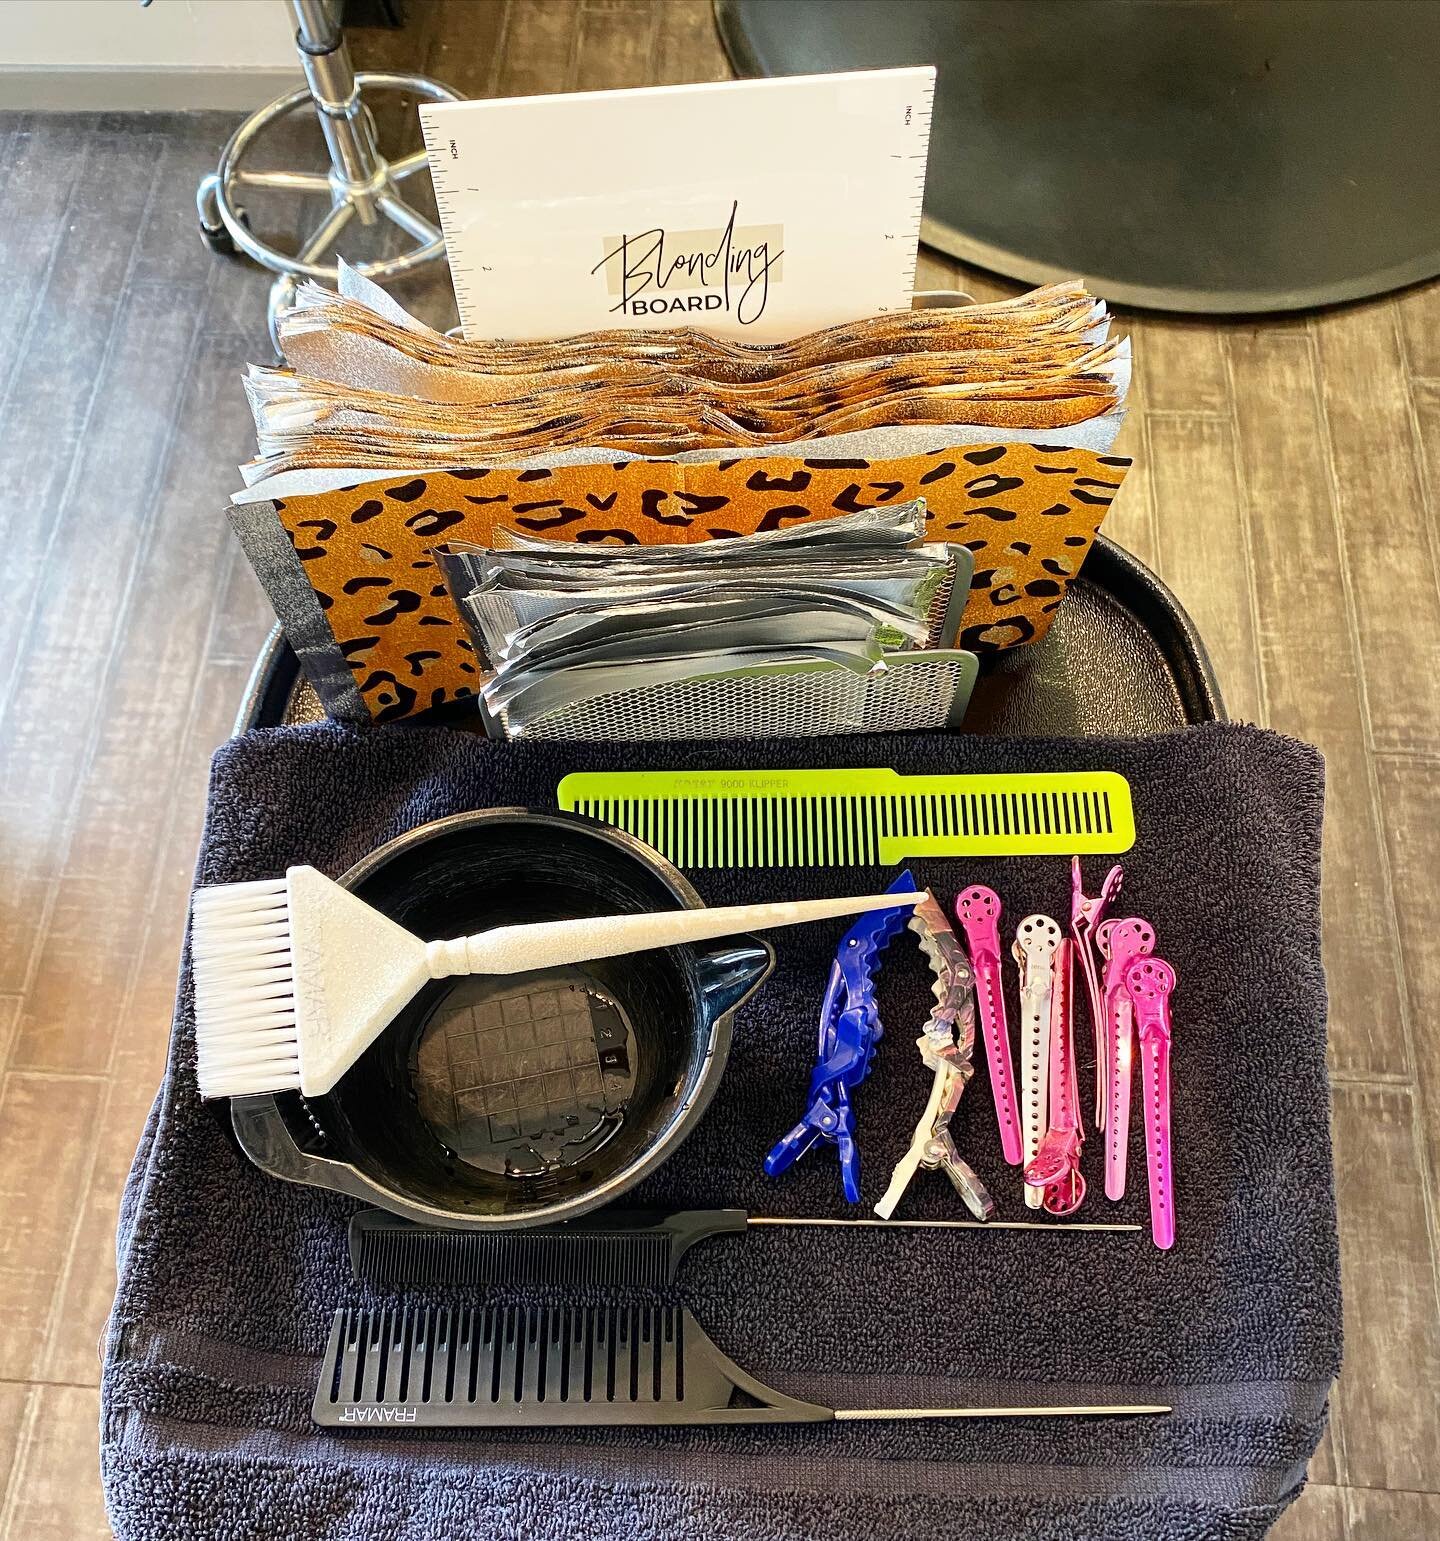 When the highlight set up is on point. @the_blondologist&rsquo;s letter organizer/foil &amp; board hack is next level!  #saturdayvibes #losangeleshairstylist #lahairstylist #wehohairstylist